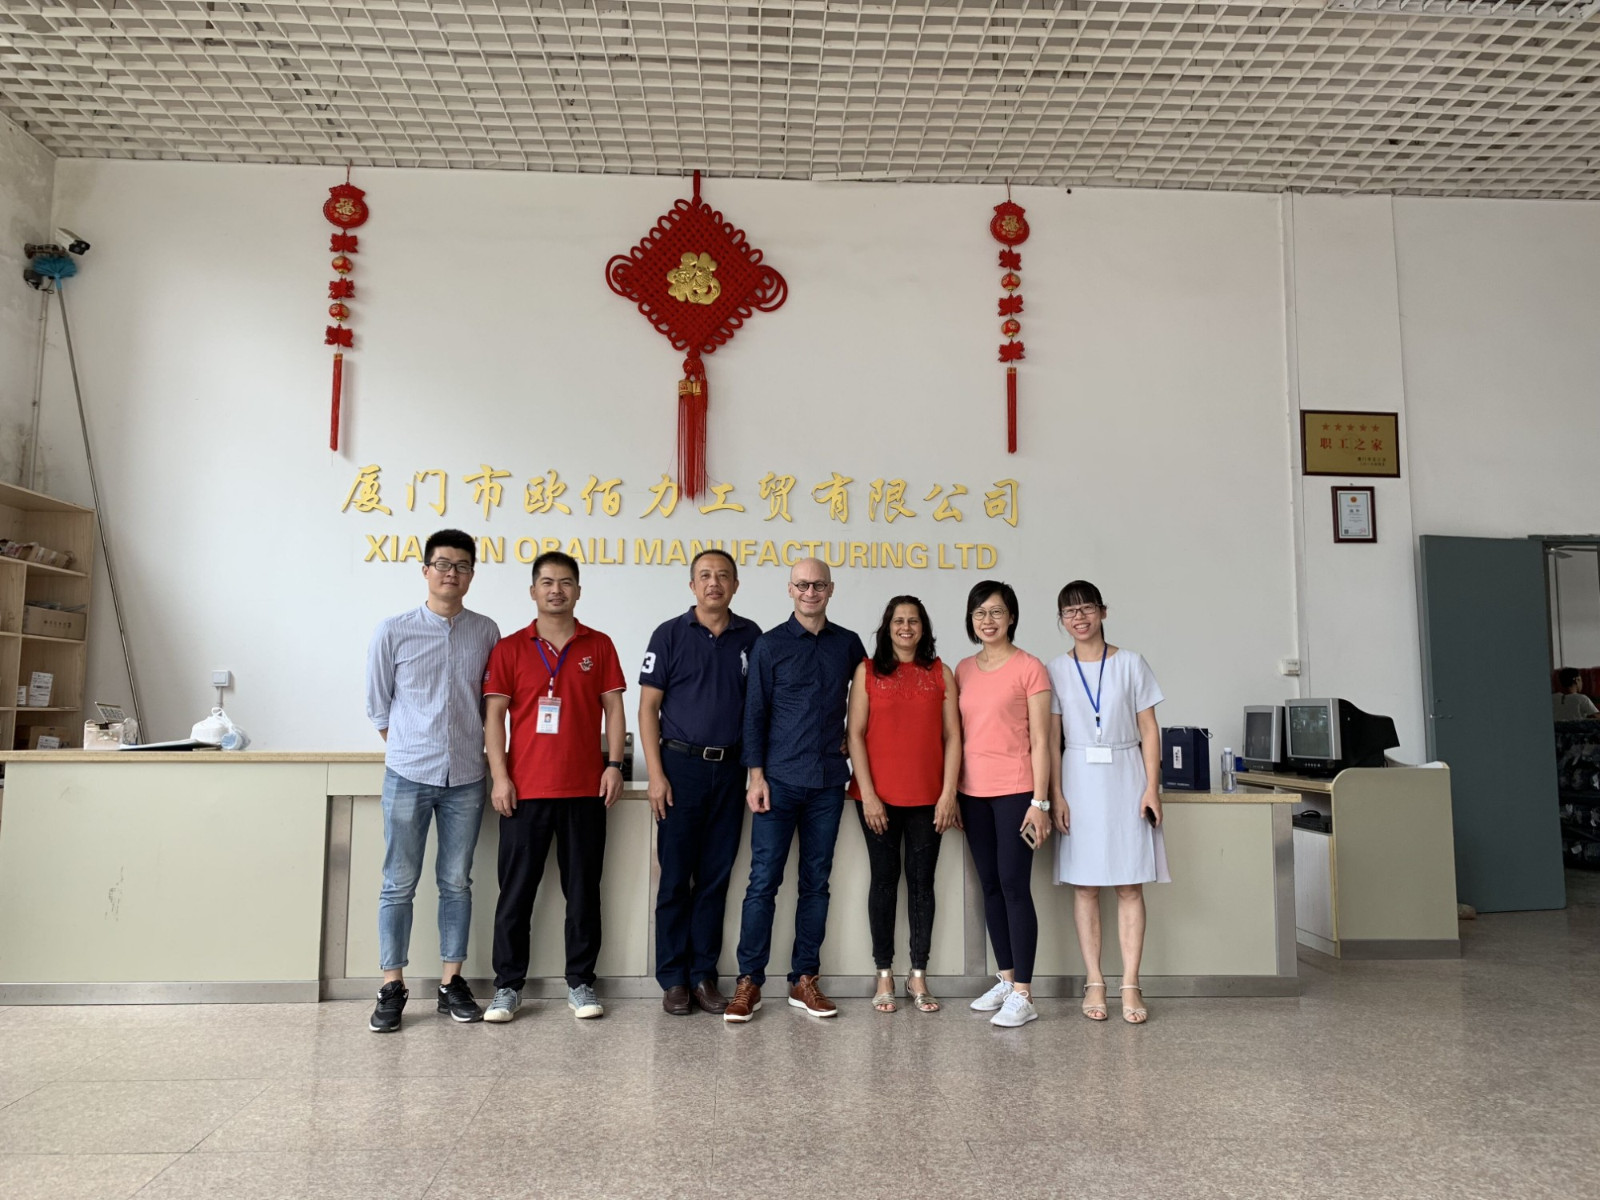 Overseas clients come to visit our company